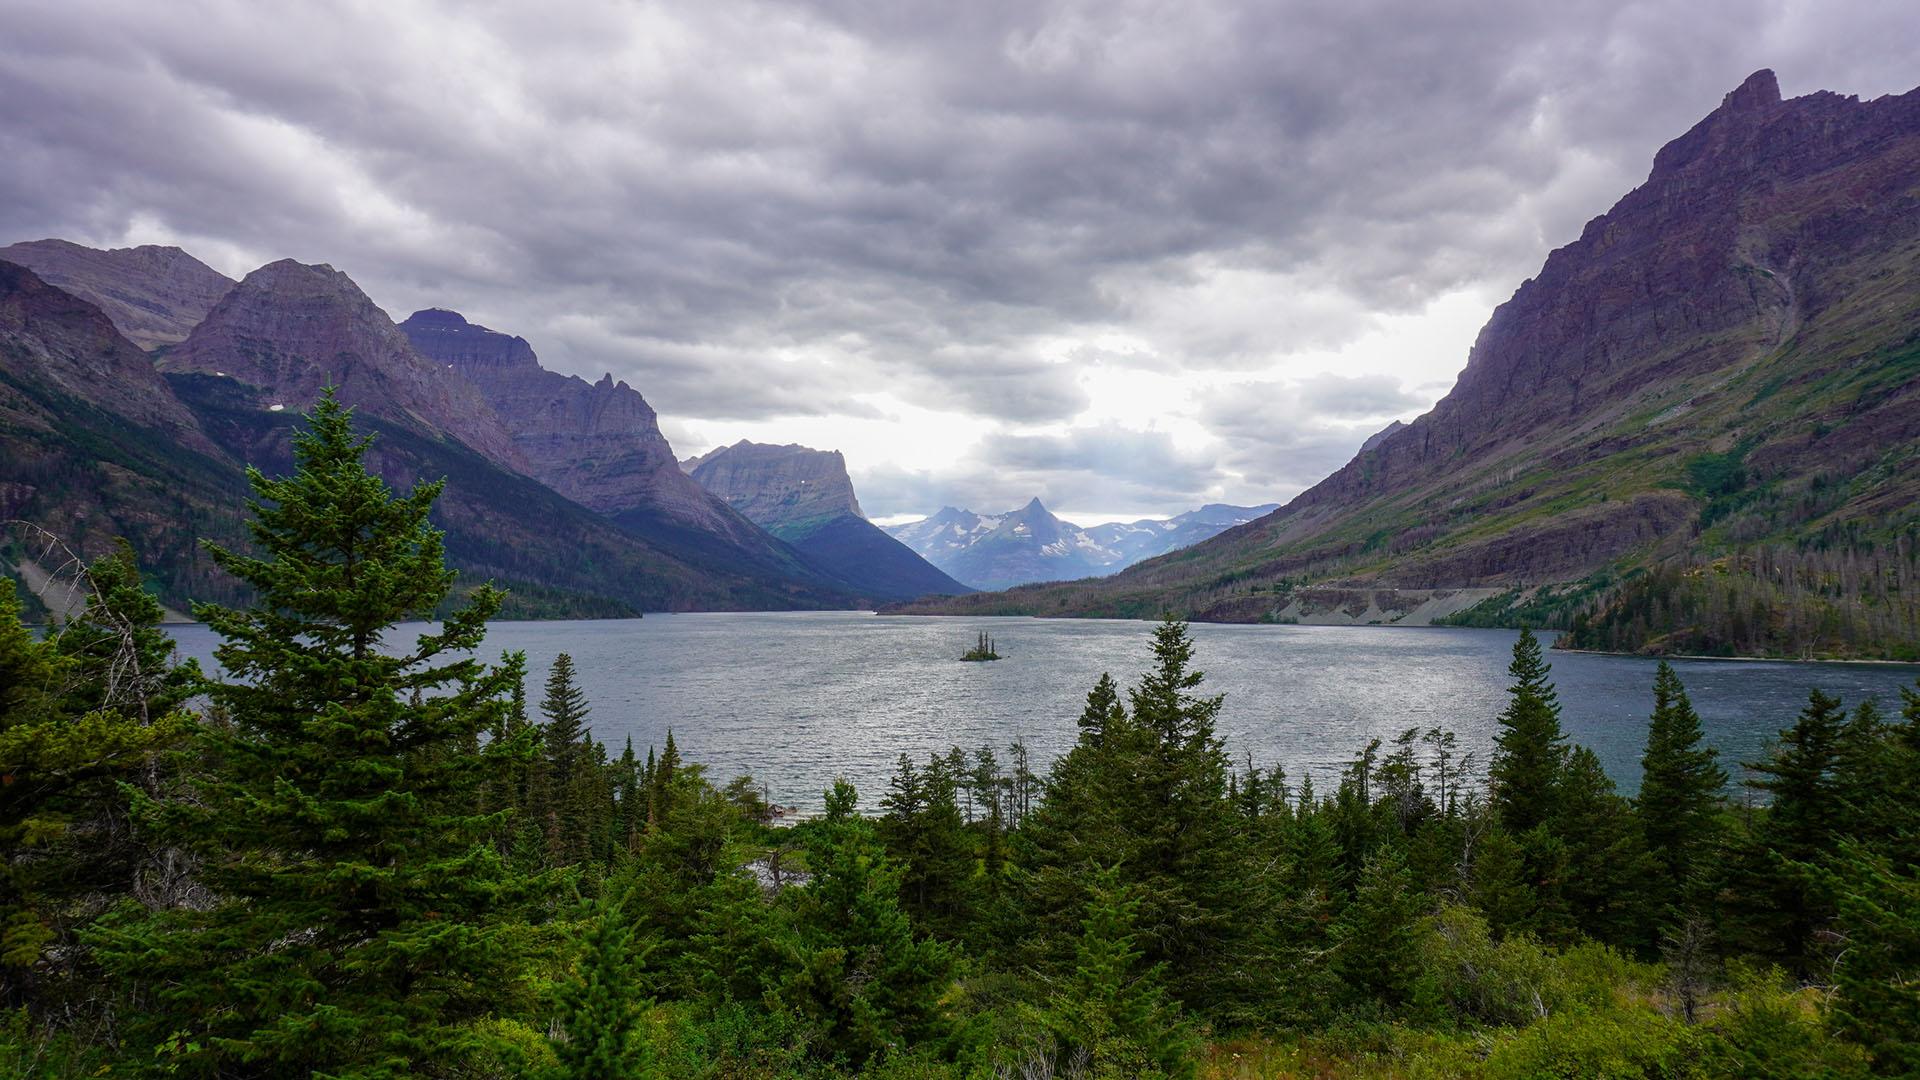 St. Mary Lake in Glacier National Park